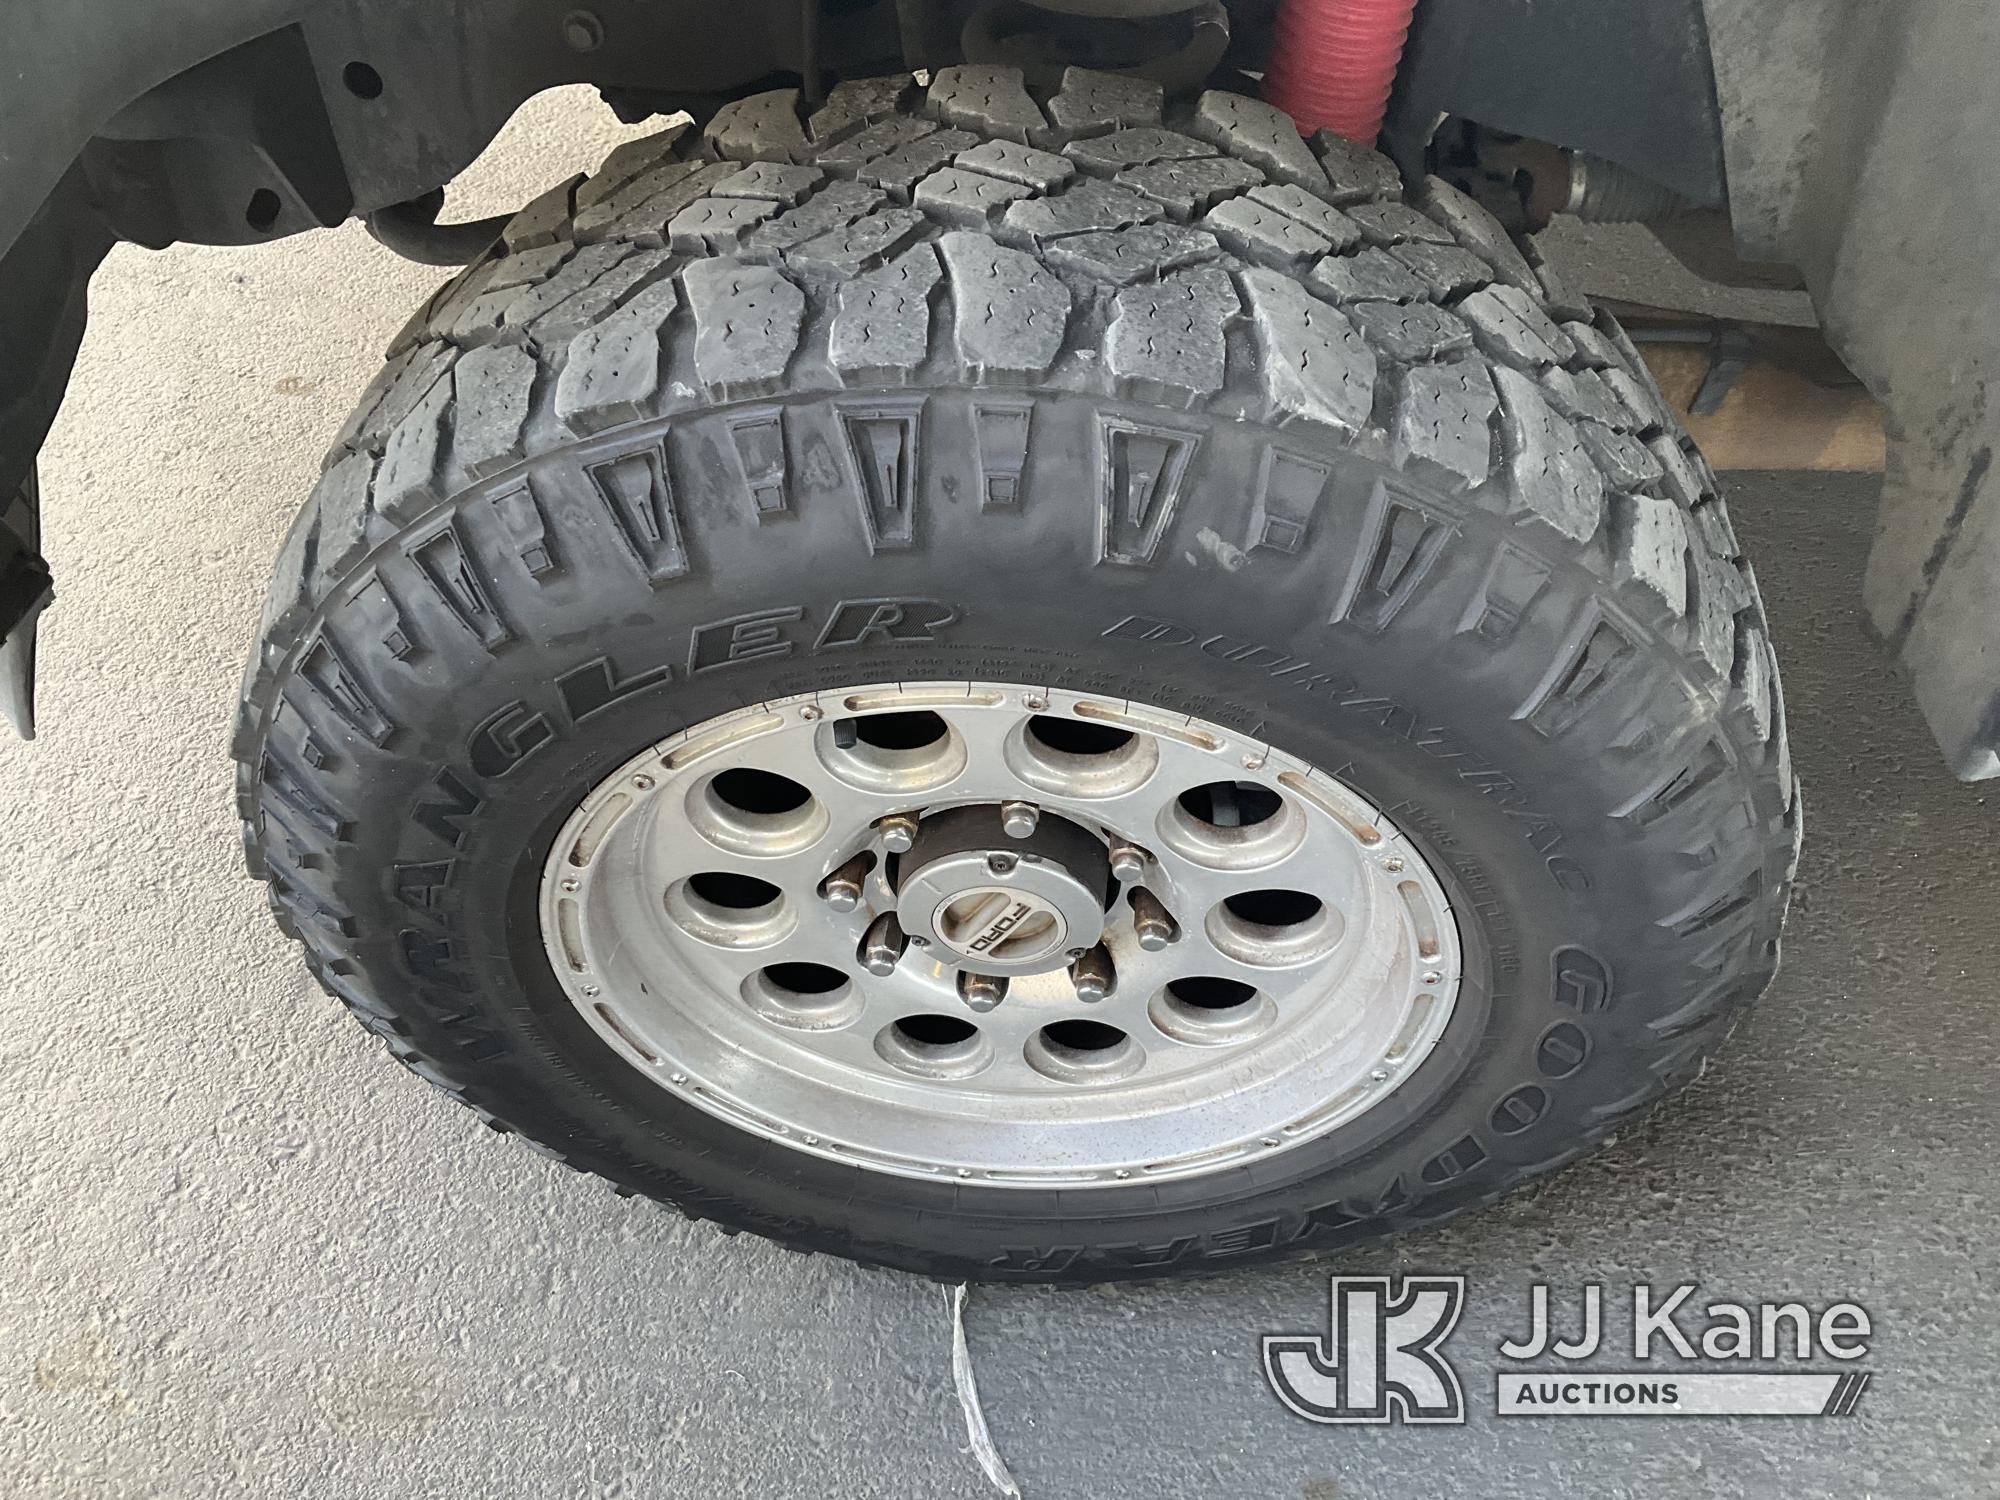 (Jurupa Valley, CA) 2009 Ford F250 4x4 XL Extended-Cab Pickup Truck Run & Moves Tire Light Is On